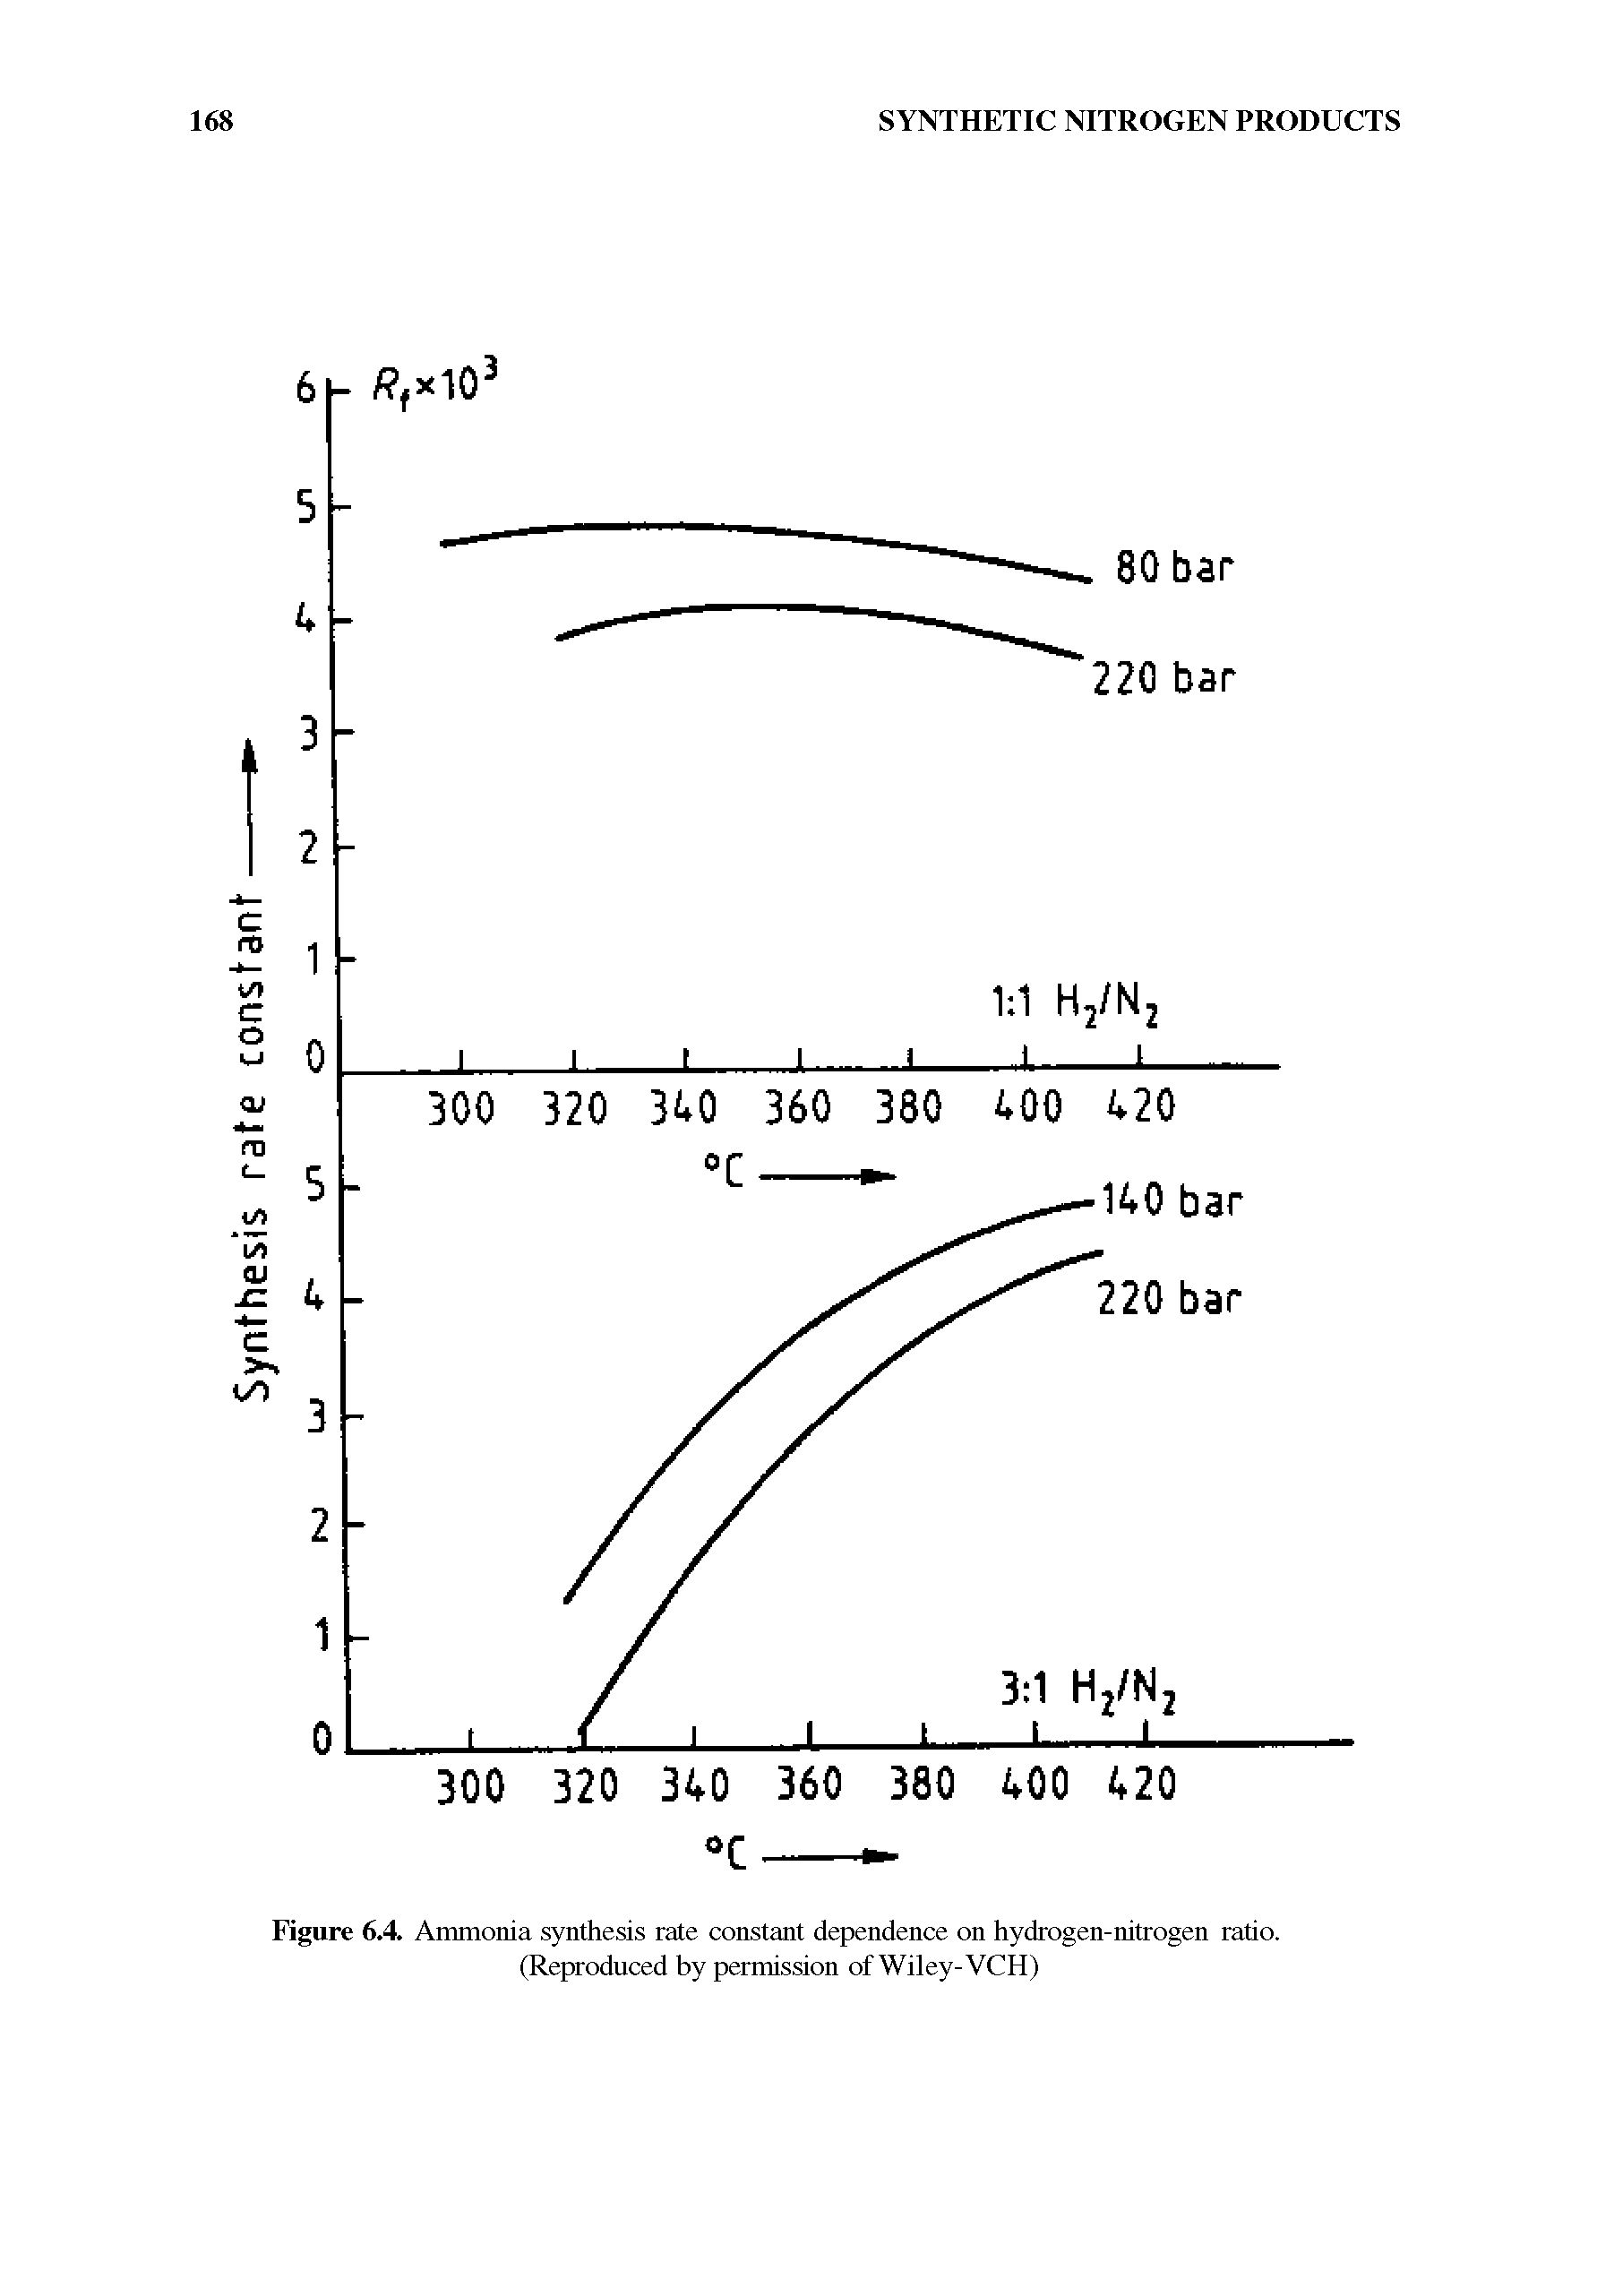 Figure 6.4. Ammonia synthesis rate constant dependence on hydrogen-nitrogen ratio. (Reproduced by permission of Wiley-VCH)...